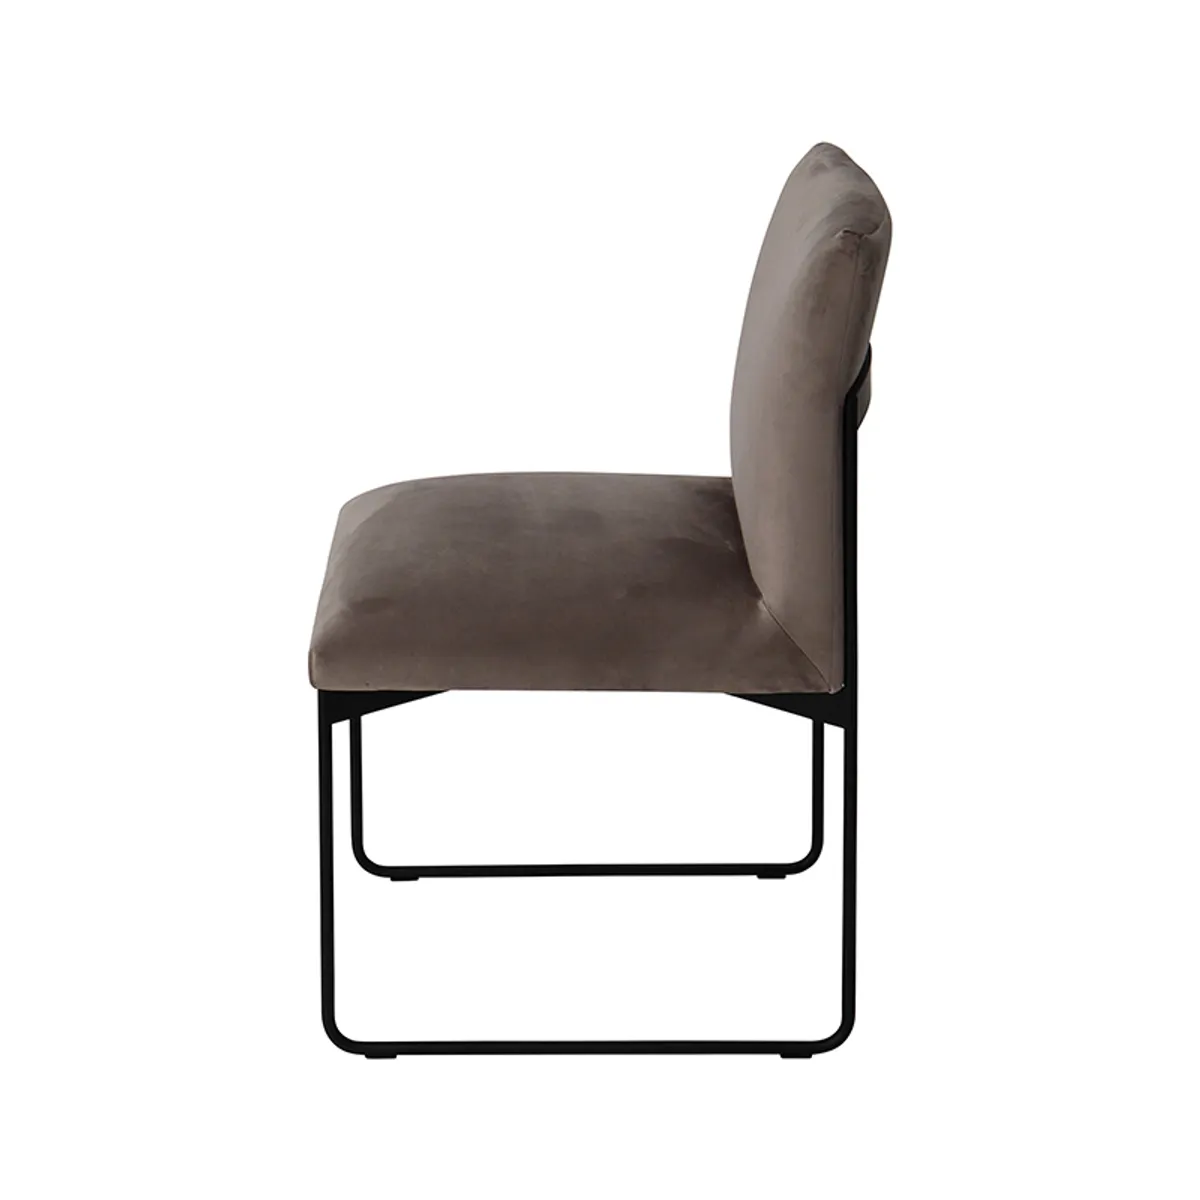 Gala Side Chair Plush Furniture Inside Out Contracts